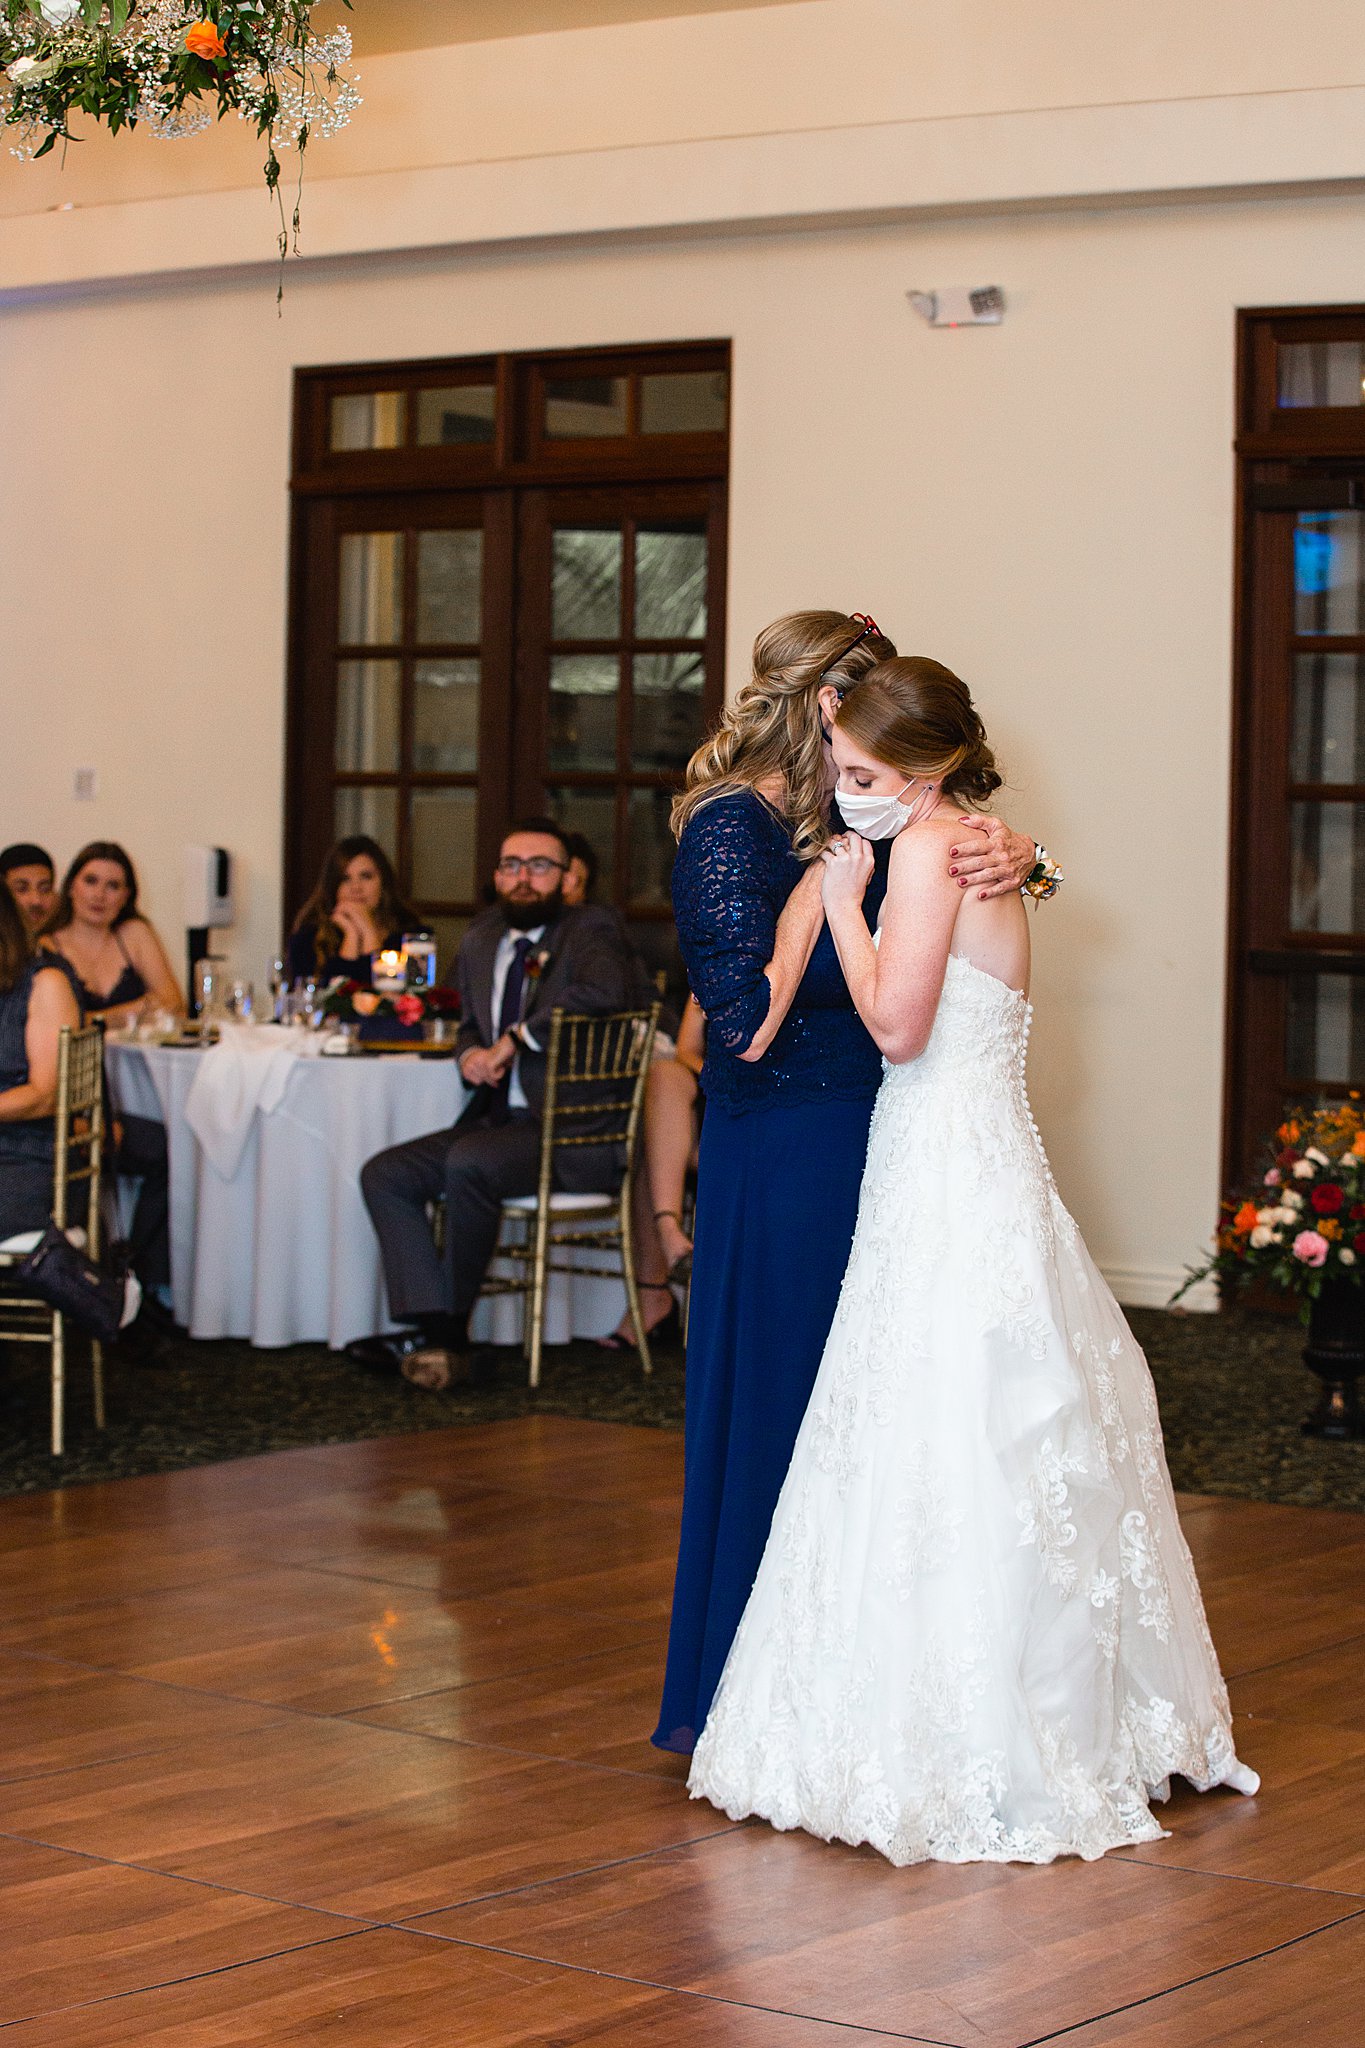 Bride dancing with her mother at Secret Garden Events wedding reception by Phoenix wedding photographer PMA Photography